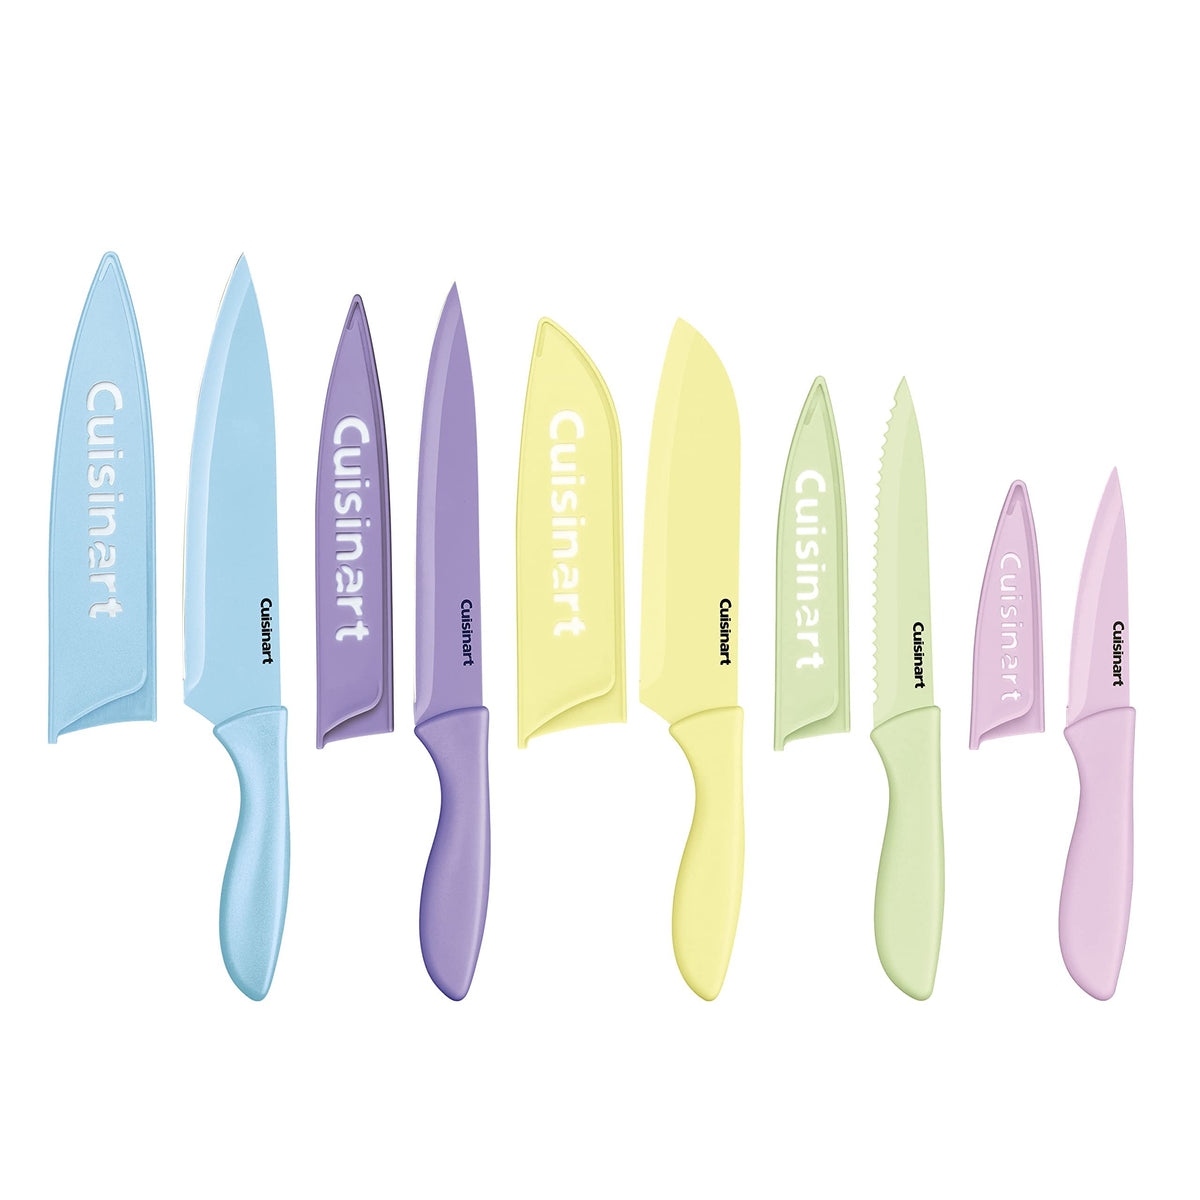 Cuisinart C55-12PR1 12-Piece Printed Color Knife Set with Blade